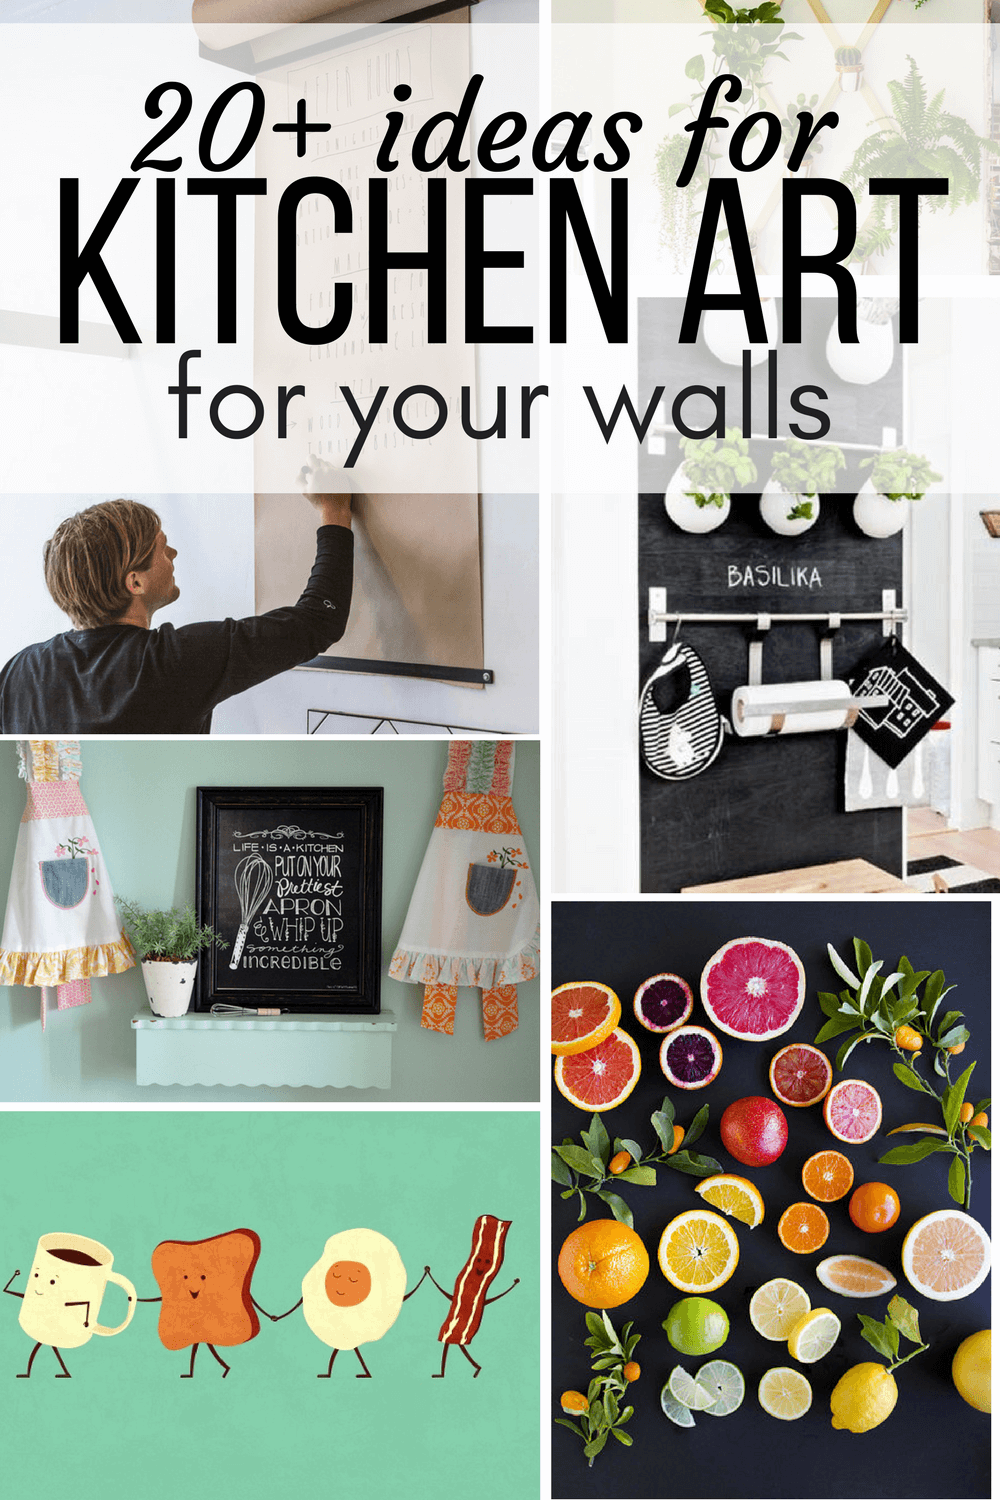 ART FOR THE KITCHEN 1 